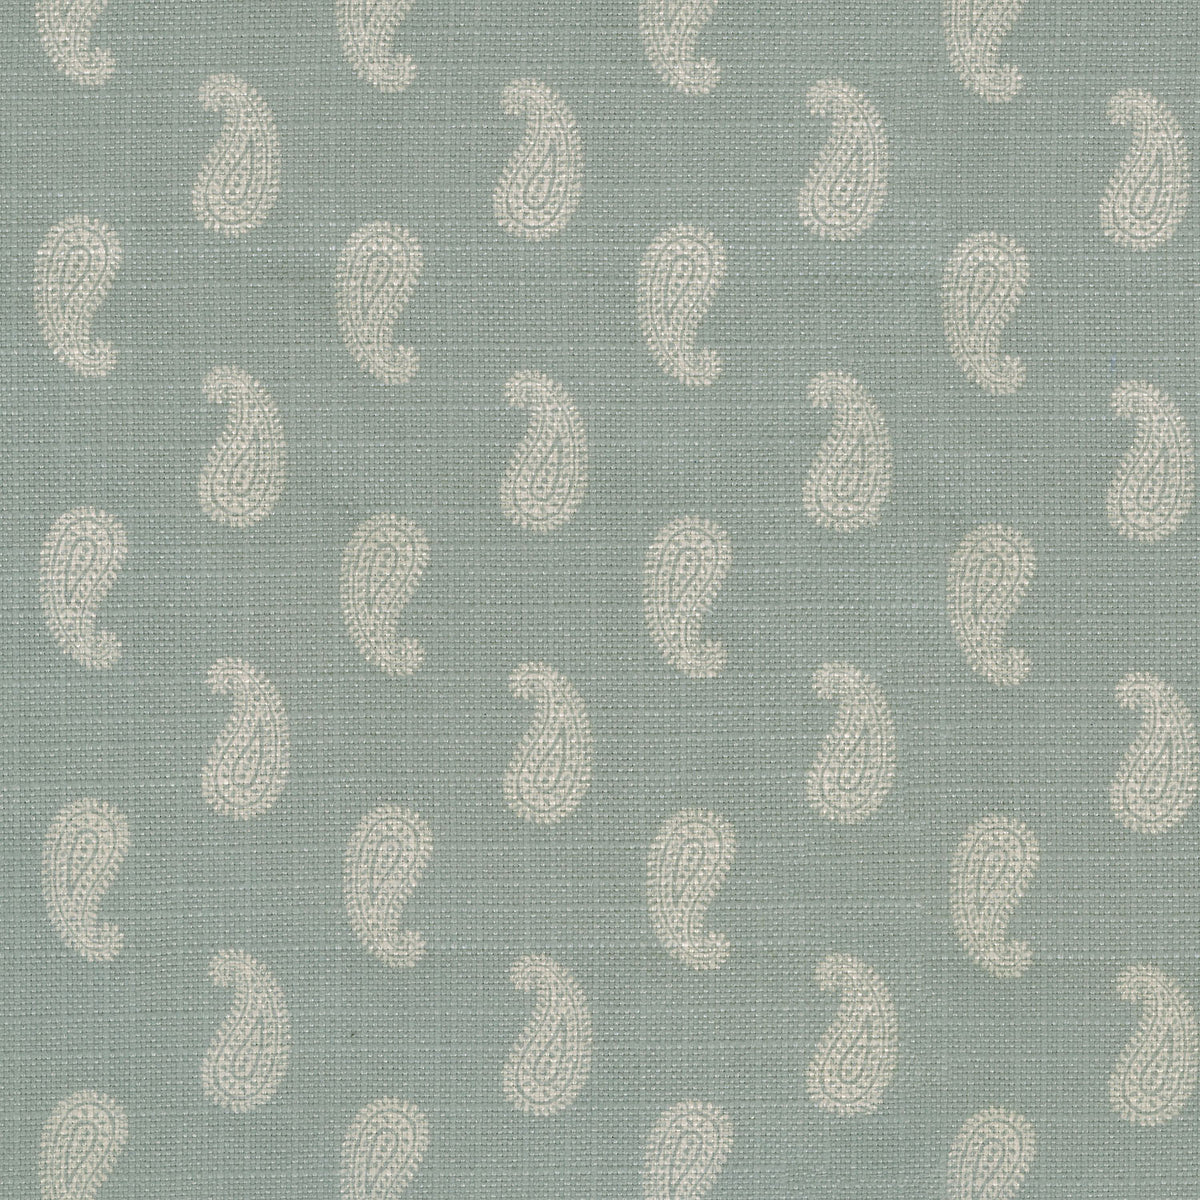 Performance + Simple Stamp - Mist 409221 Fabric Swatch